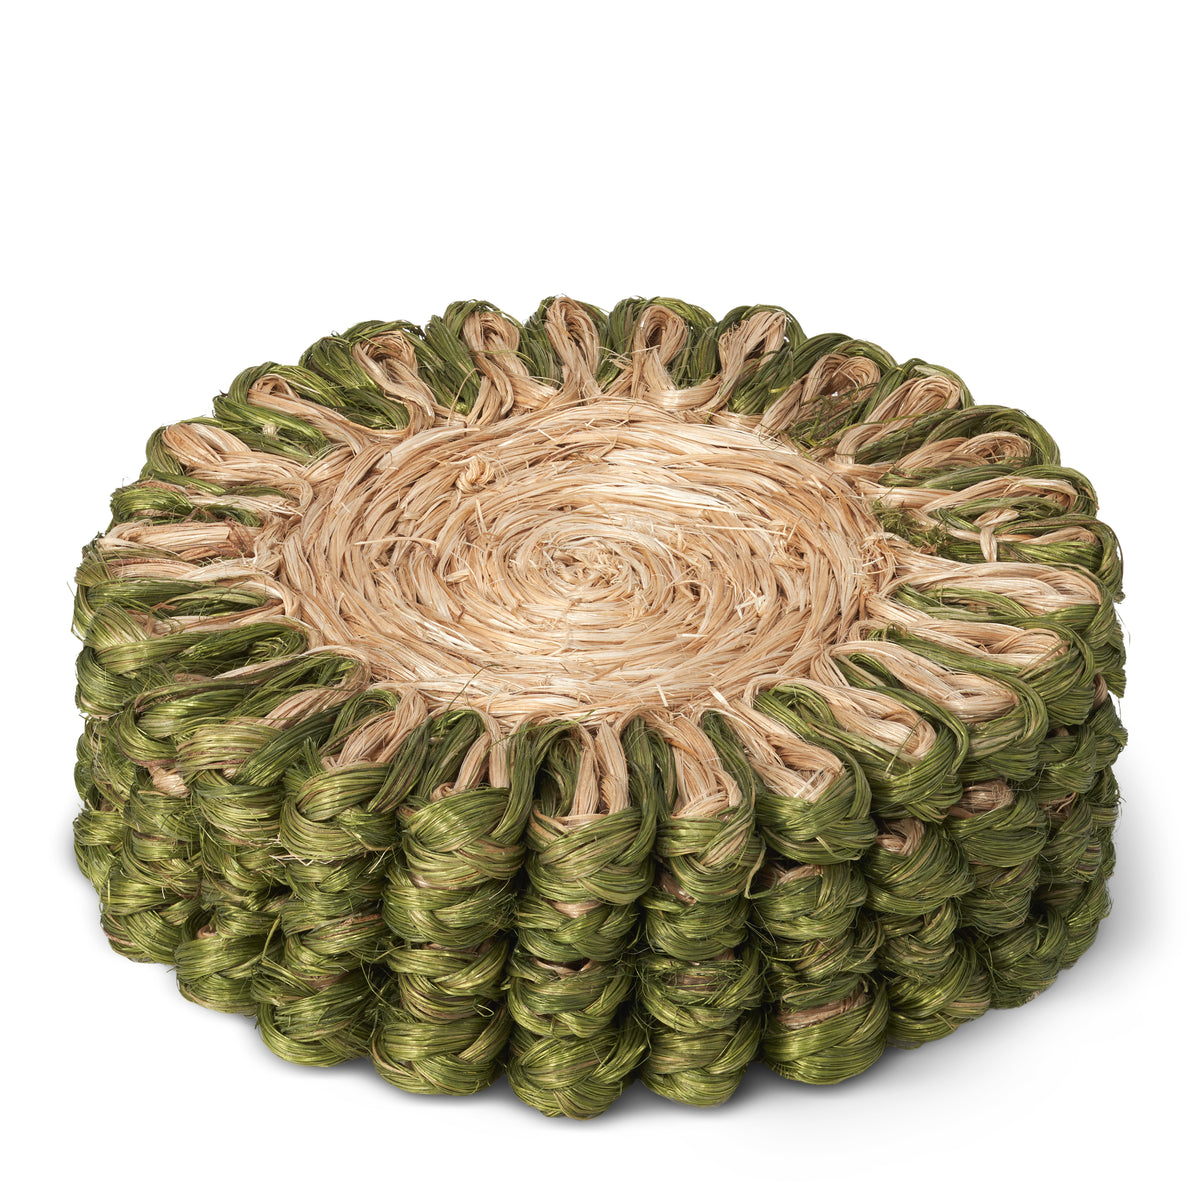 Annisa Straw Coasters in  Natural & Green, Set of 4